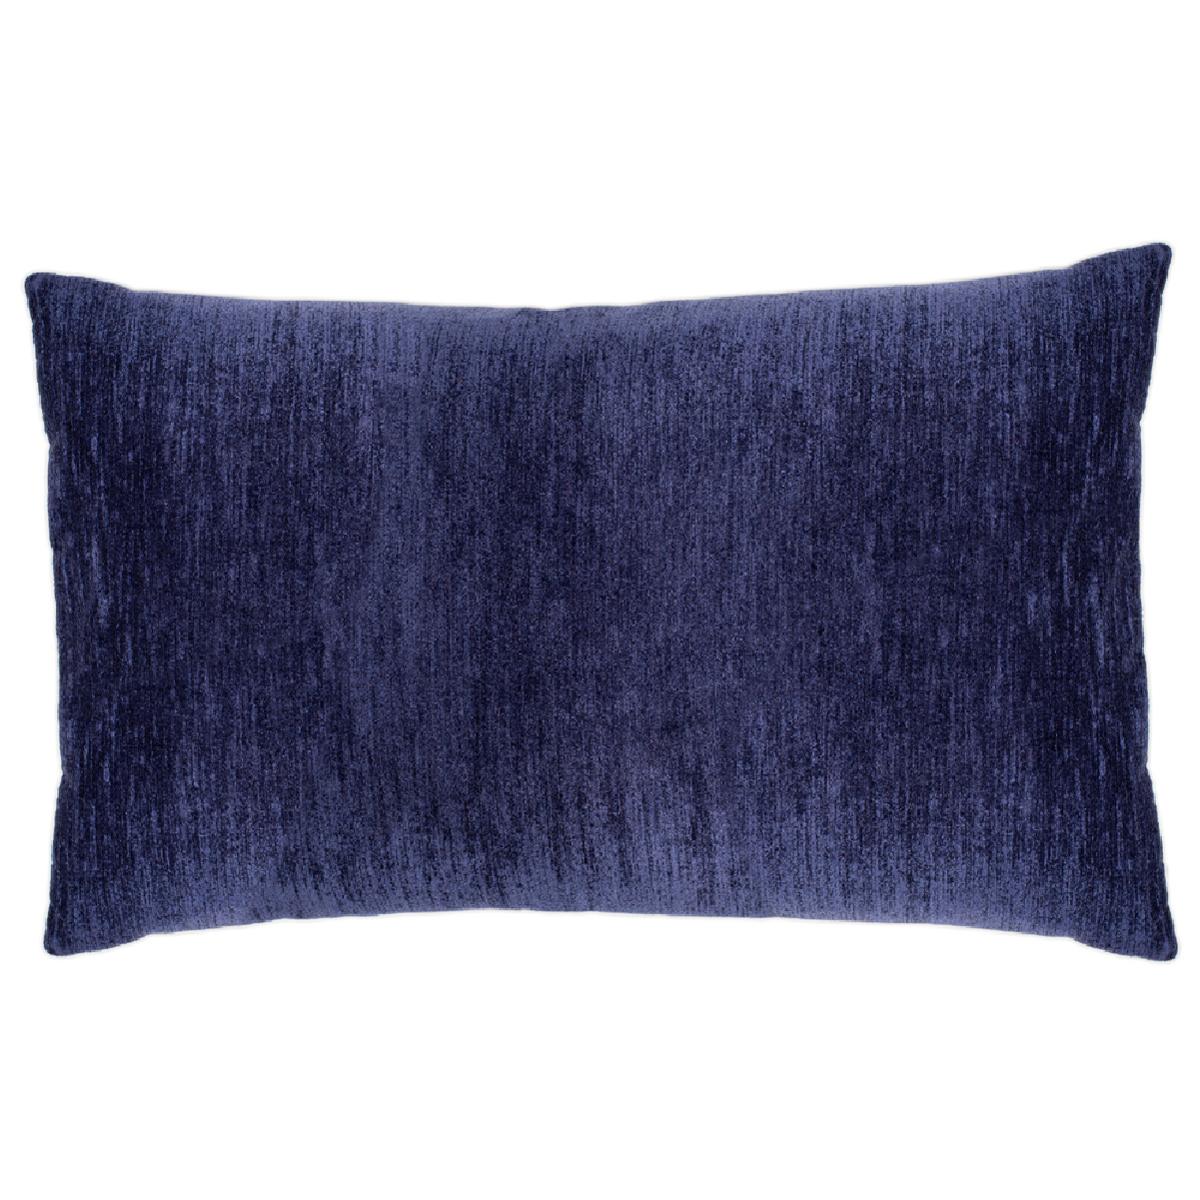 COLOUR: Blue 
FRONT MATERIAL: 50% Viscose, 34% Polyester, 16% Cotton Jacquard woven fabric
BACK MATERIAL: Chenille 
FILLER: Feather
STOCK SIZE: 35cm x 60cm (approx)
ORIGIN: Fabric produced in Turkey, cushions made in the UK

Here at Knots we have